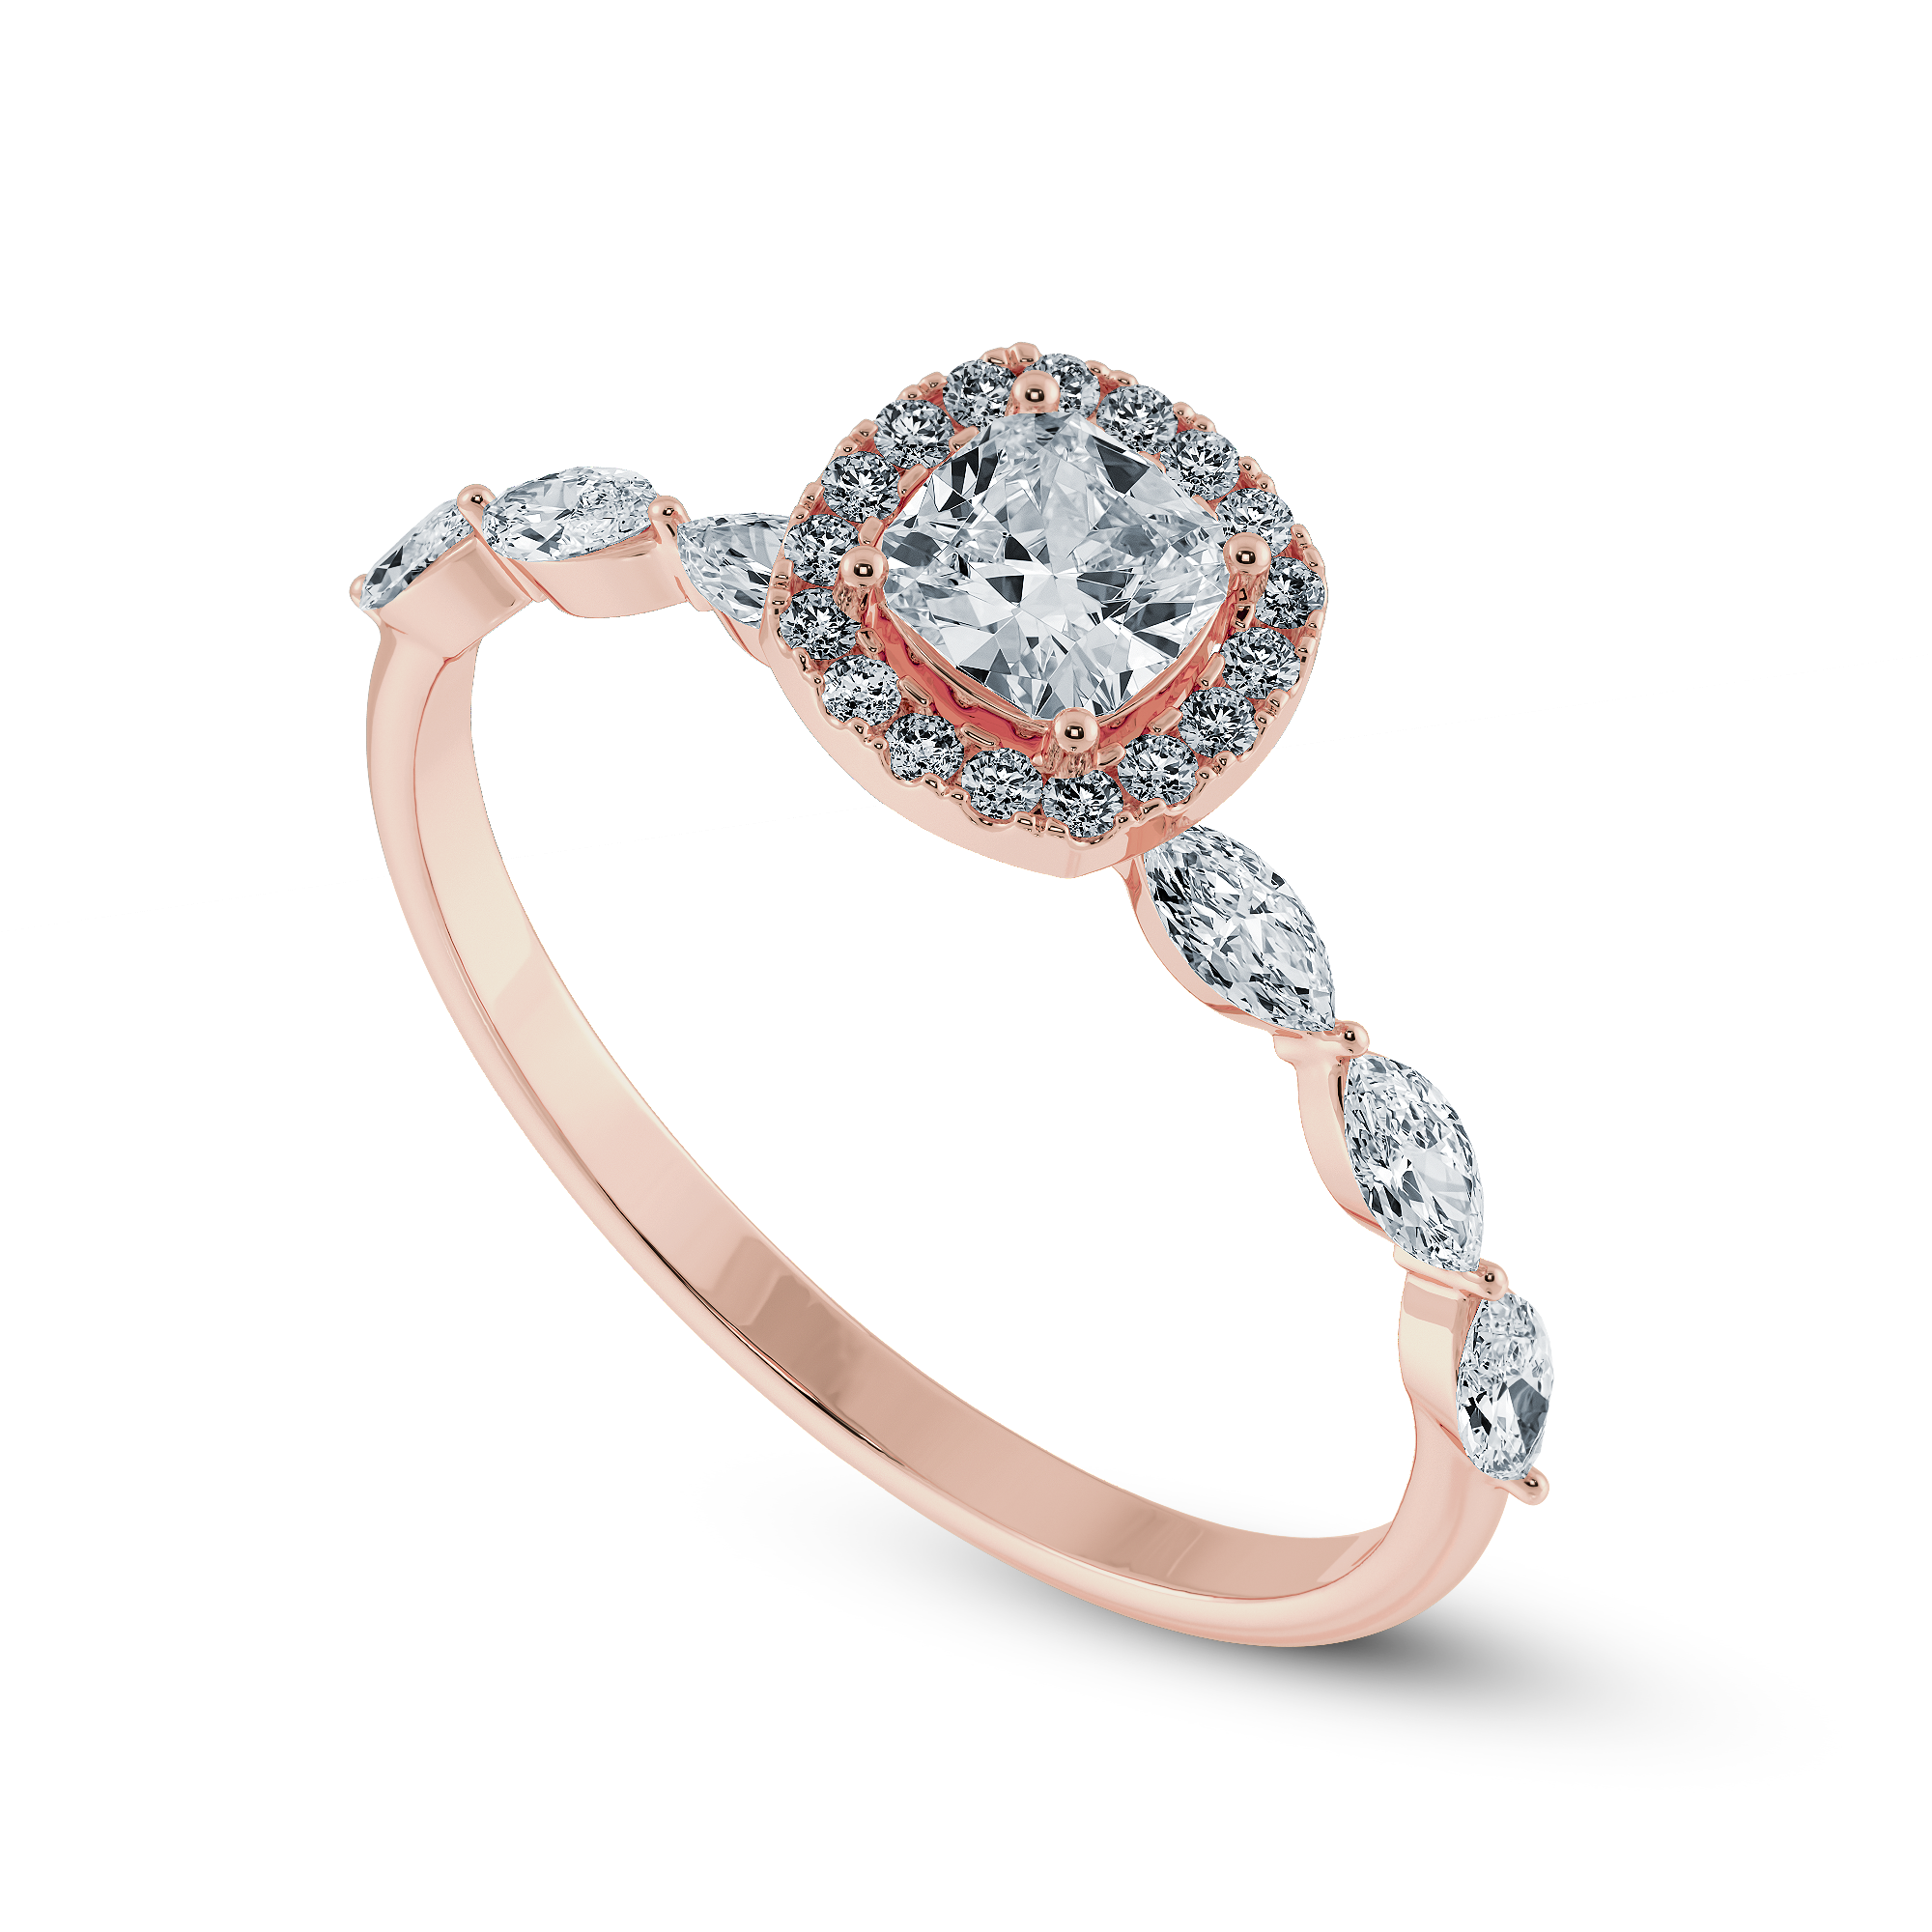 70-Pointer Cushion Cut Solitaire Halo Diamonds with Marquise Cut Diamonds Accents 18K Rose Gold Ring JL AU 1271R-B